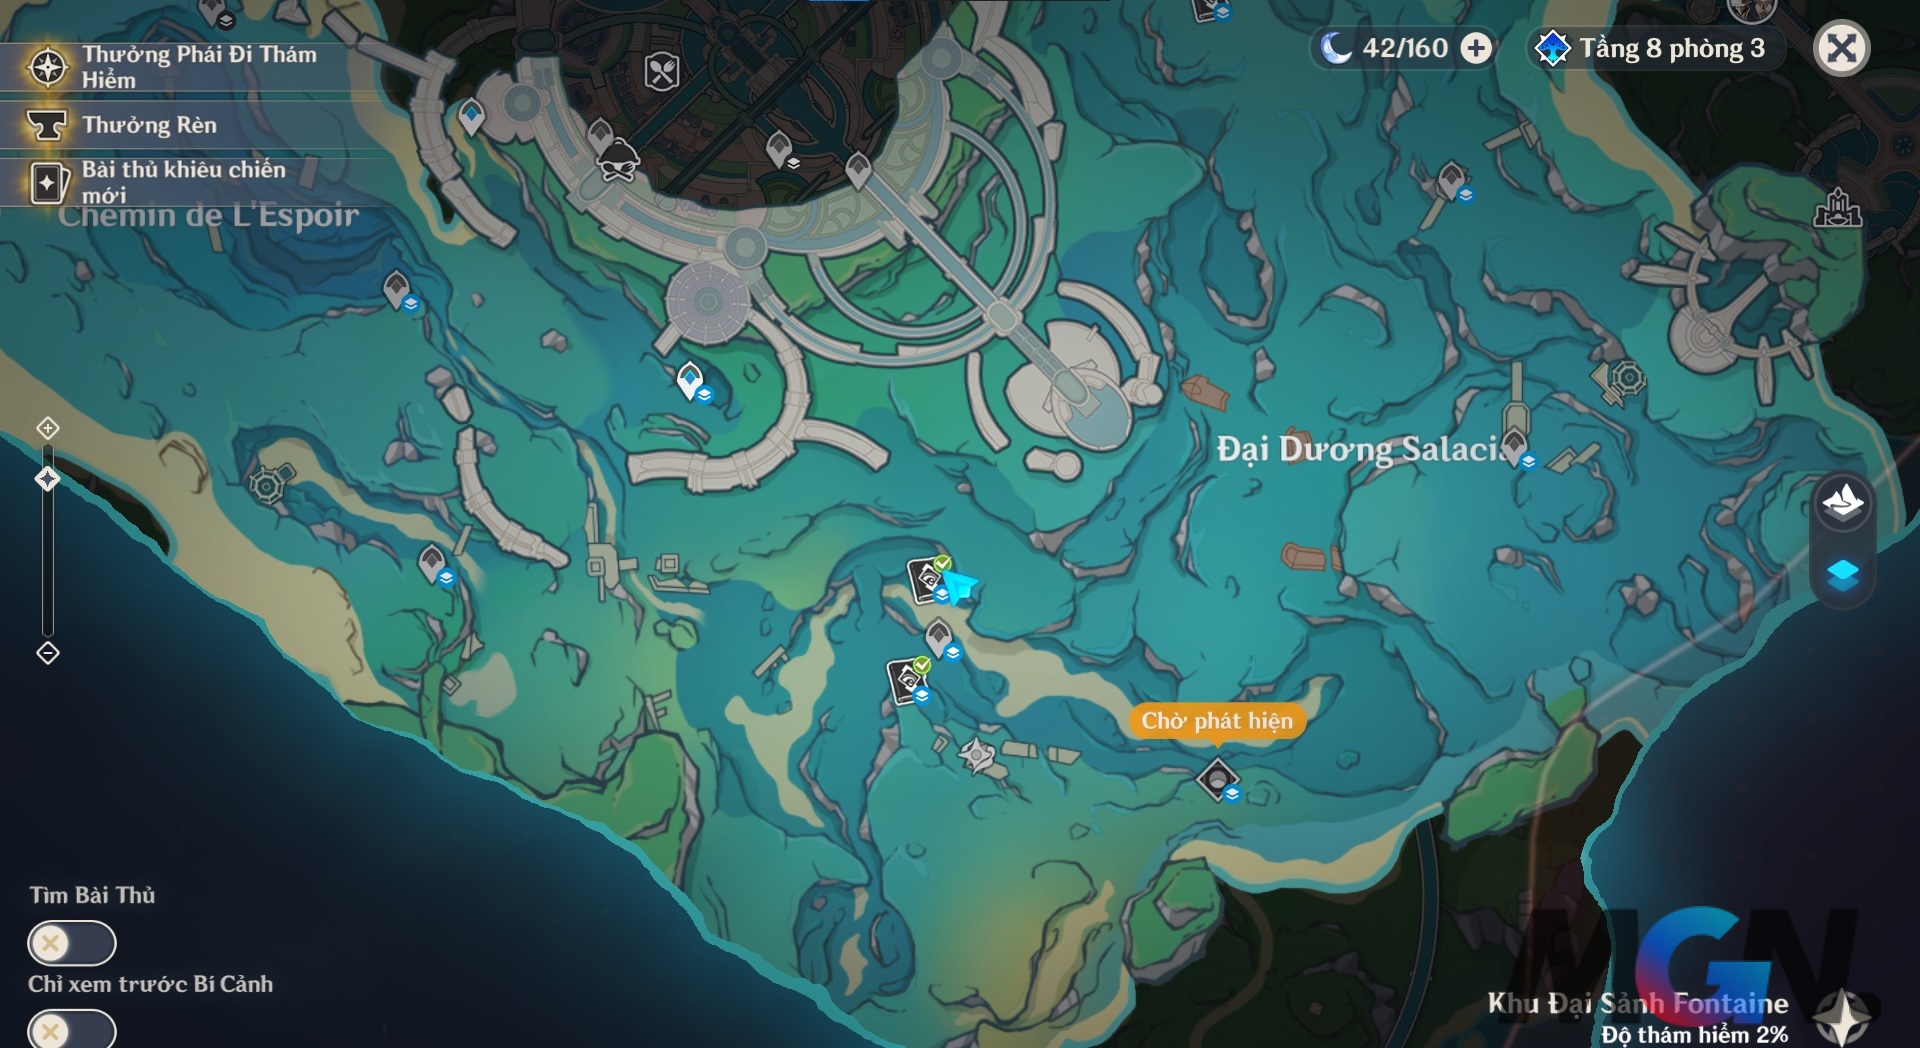 Specific location on the map